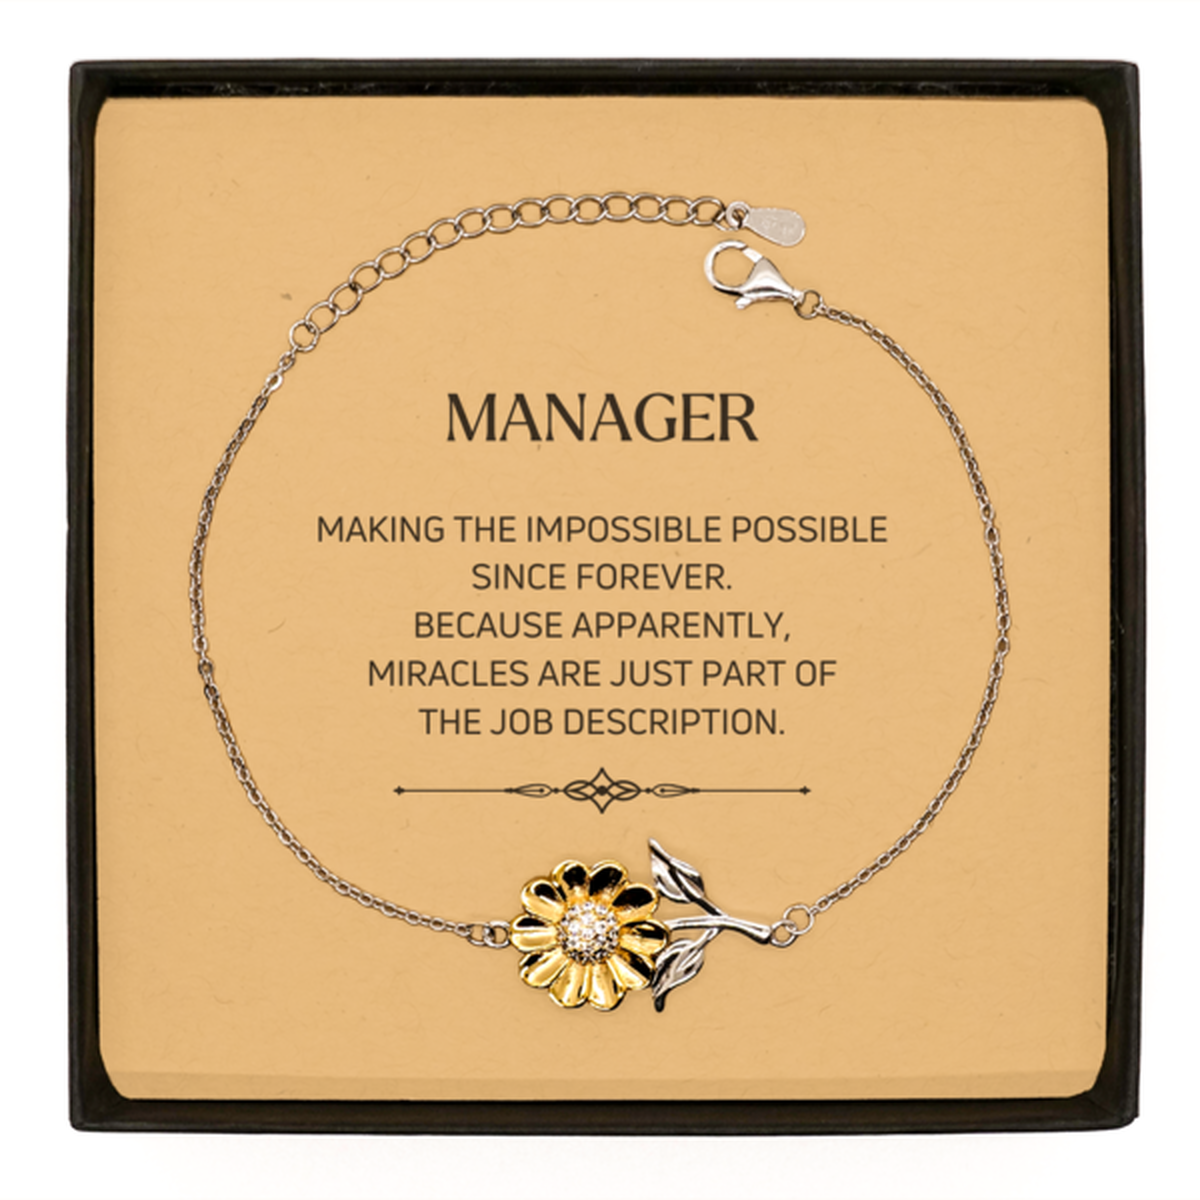 Funny Manager Gifts, Miracles are just part of the job description, Inspirational Birthday Sunflower Bracelet For Manager, Men, Women, Coworkers, Friends, Boss